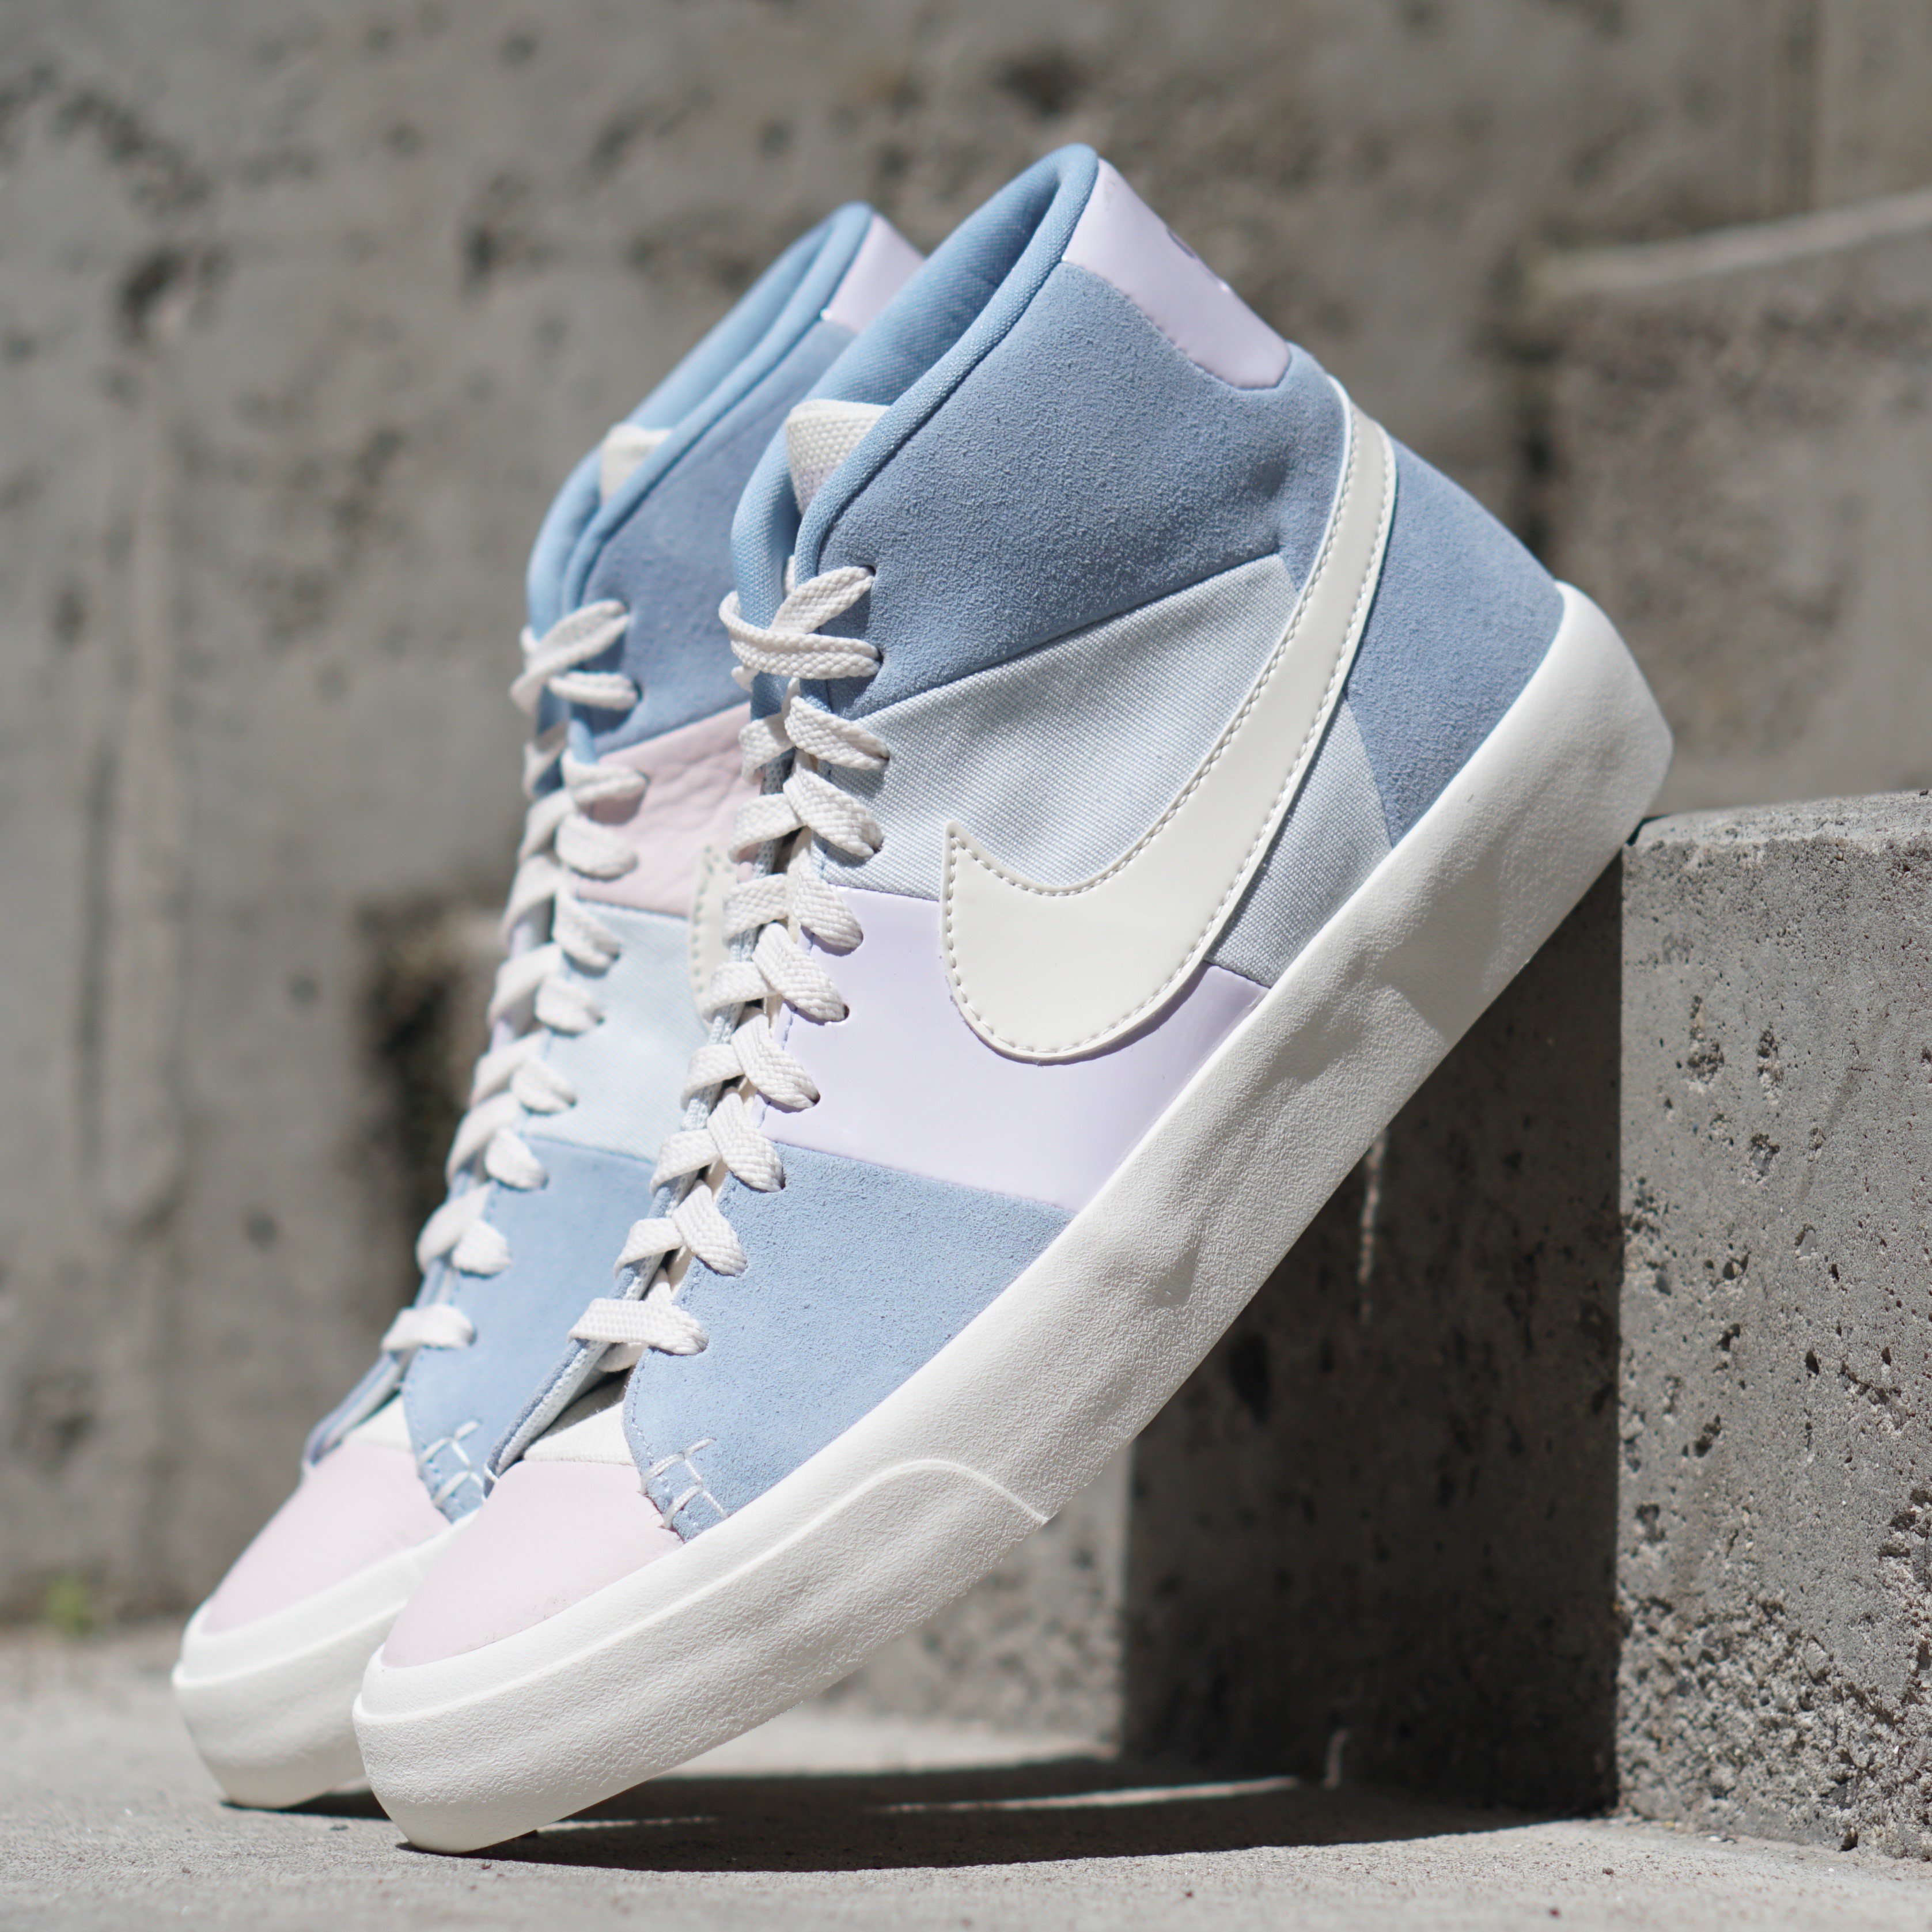 EXCLUCITY on Twitter: "Nike Air Force 1 Low '07 QS &amp; Nike Blazer Premium QS "Easter Pack" Releasing Friday May at select locations &amp; online at https://t.co/ZkqddRPaBG Yonge St. (10AM) STATUS (